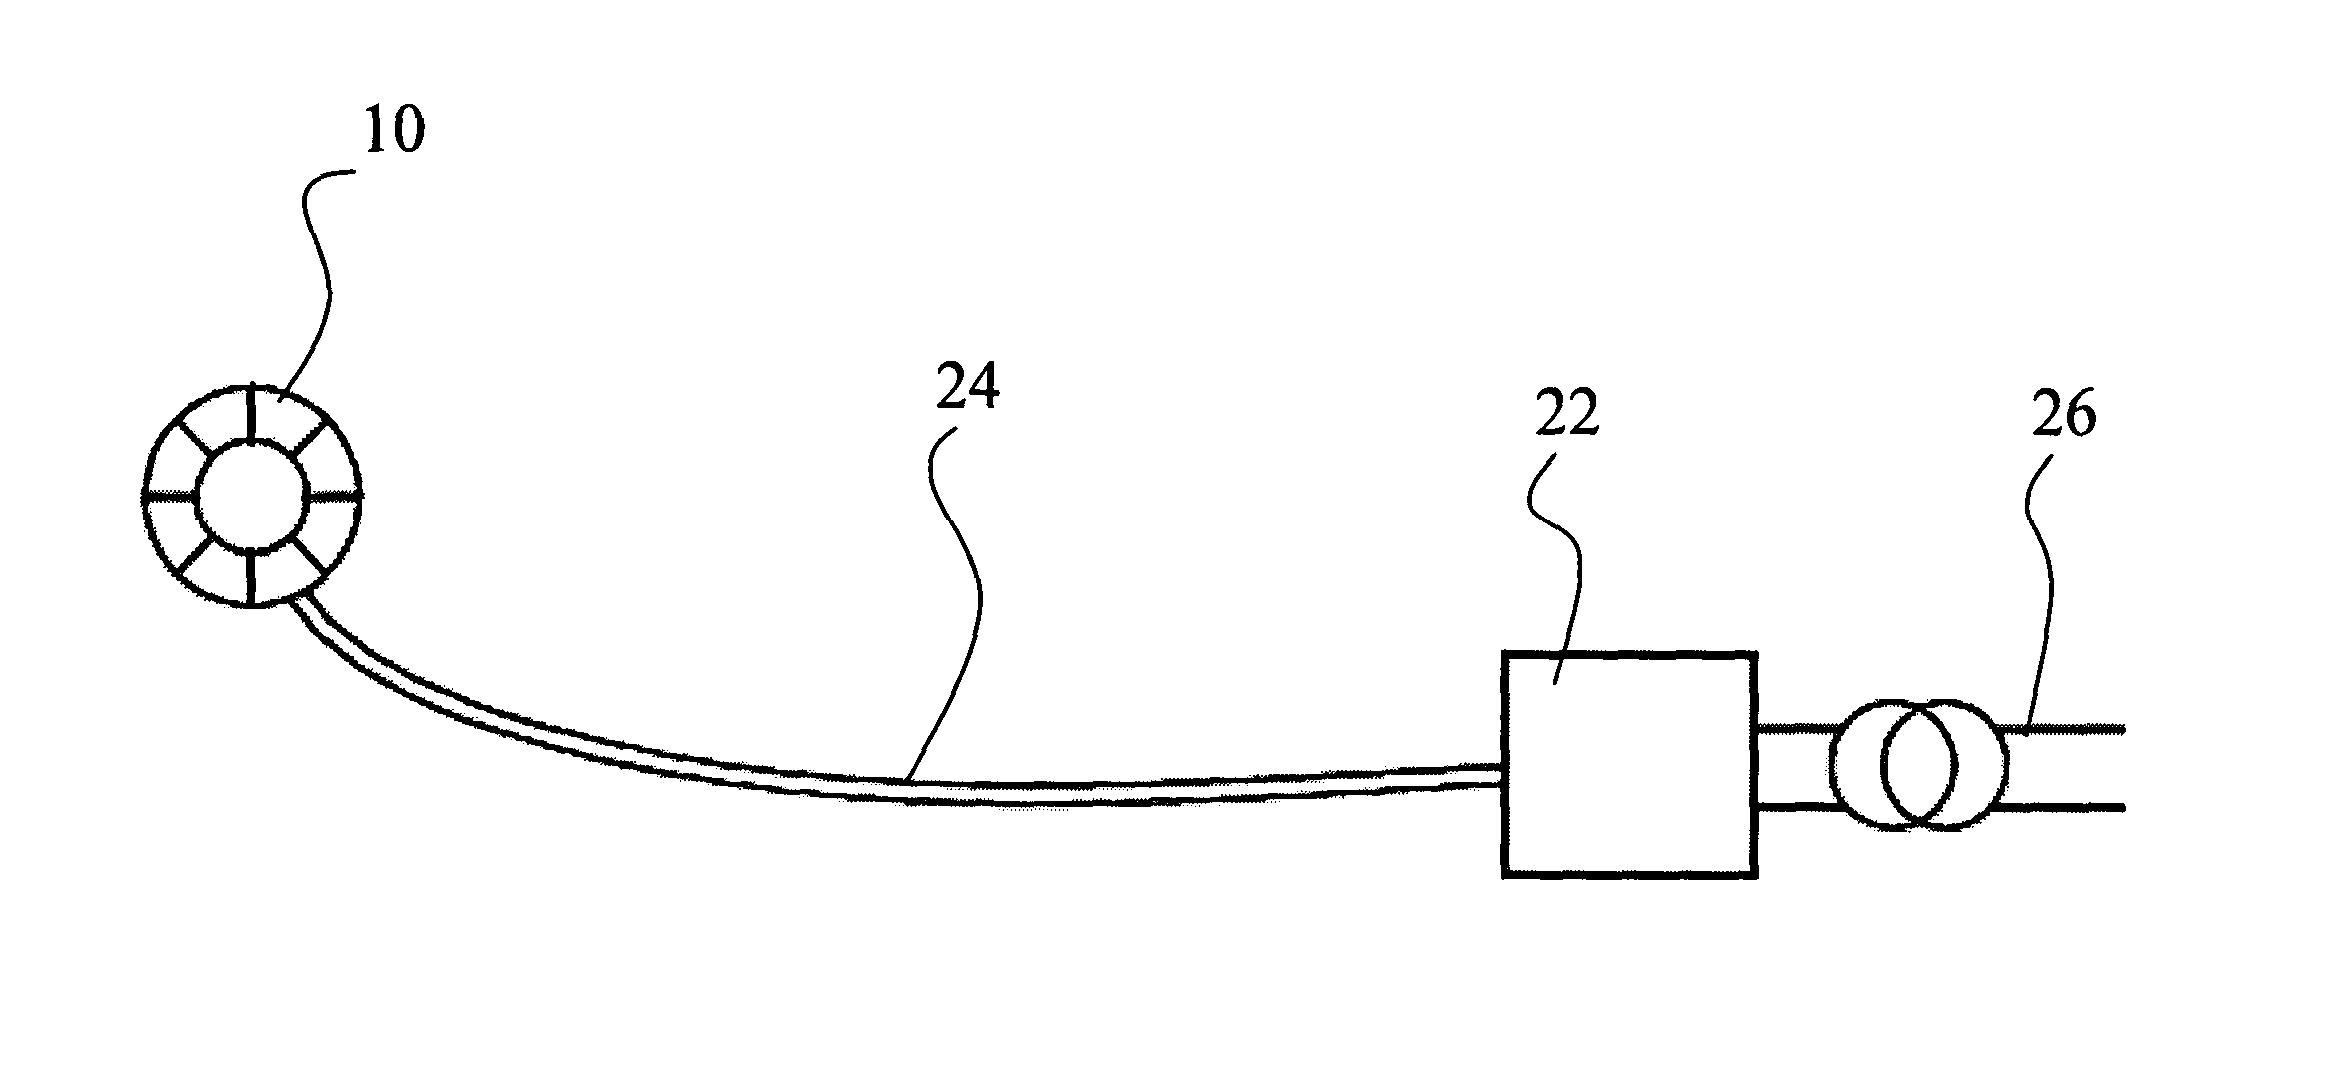 Enhanced method of controlling the output of a hydroelectric turbine generator